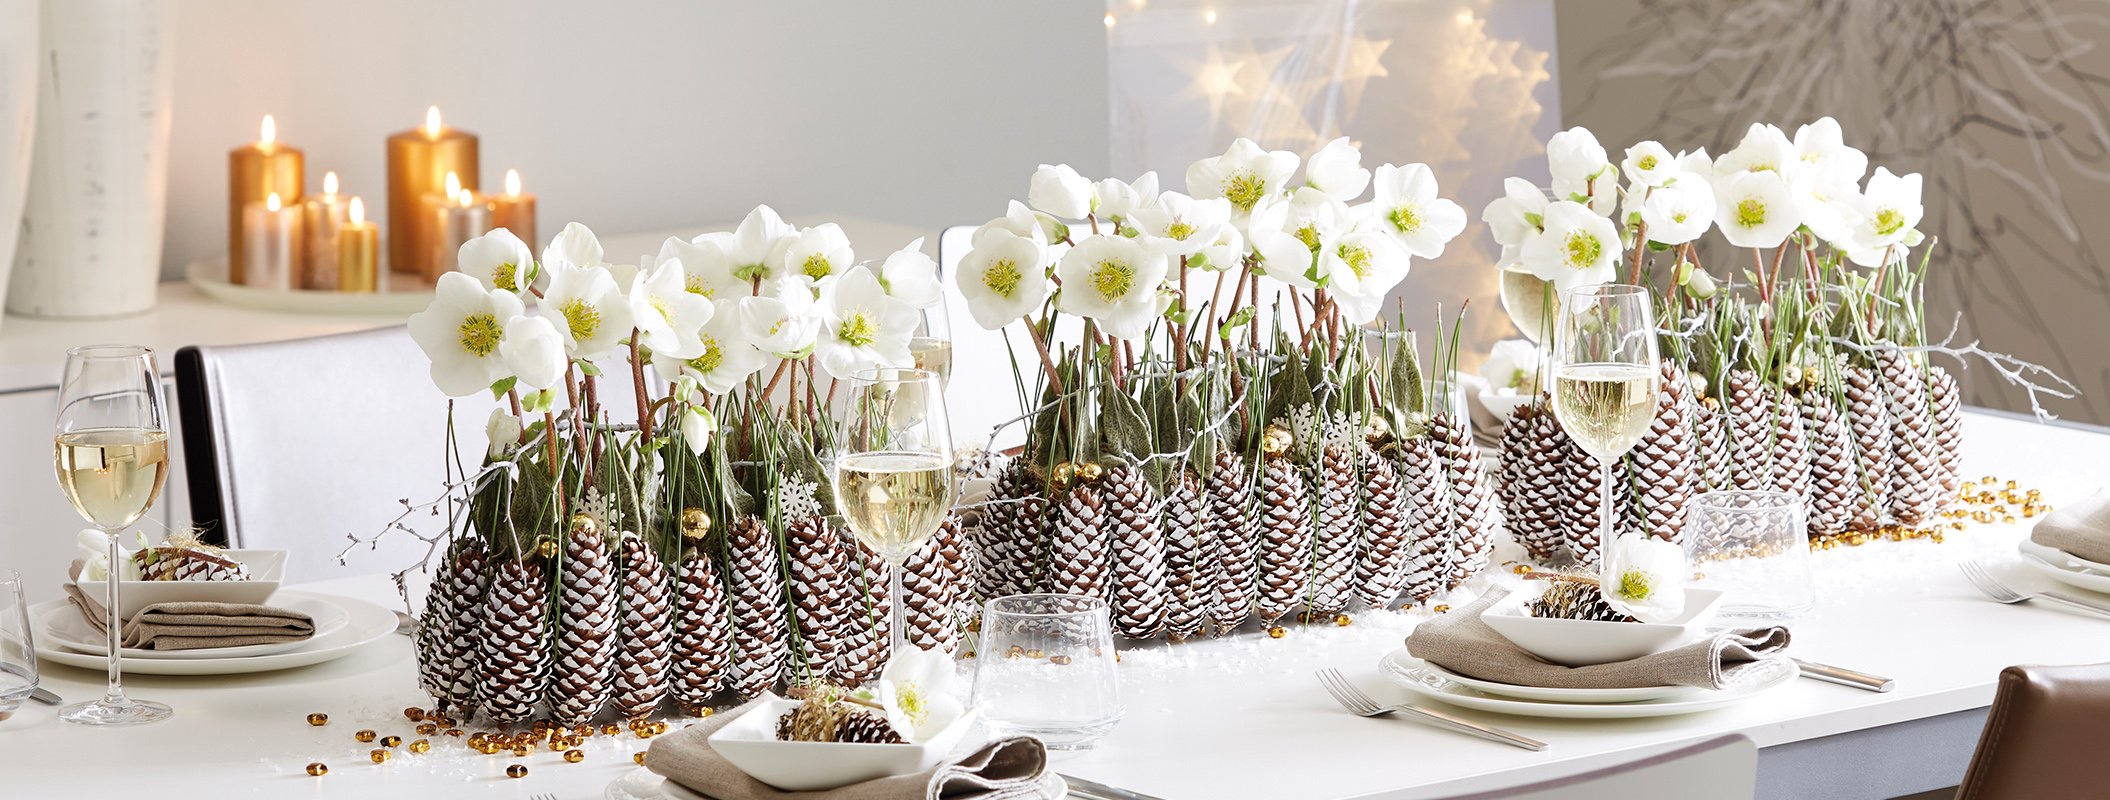 Festive table decoration with Christmas Rose flowers